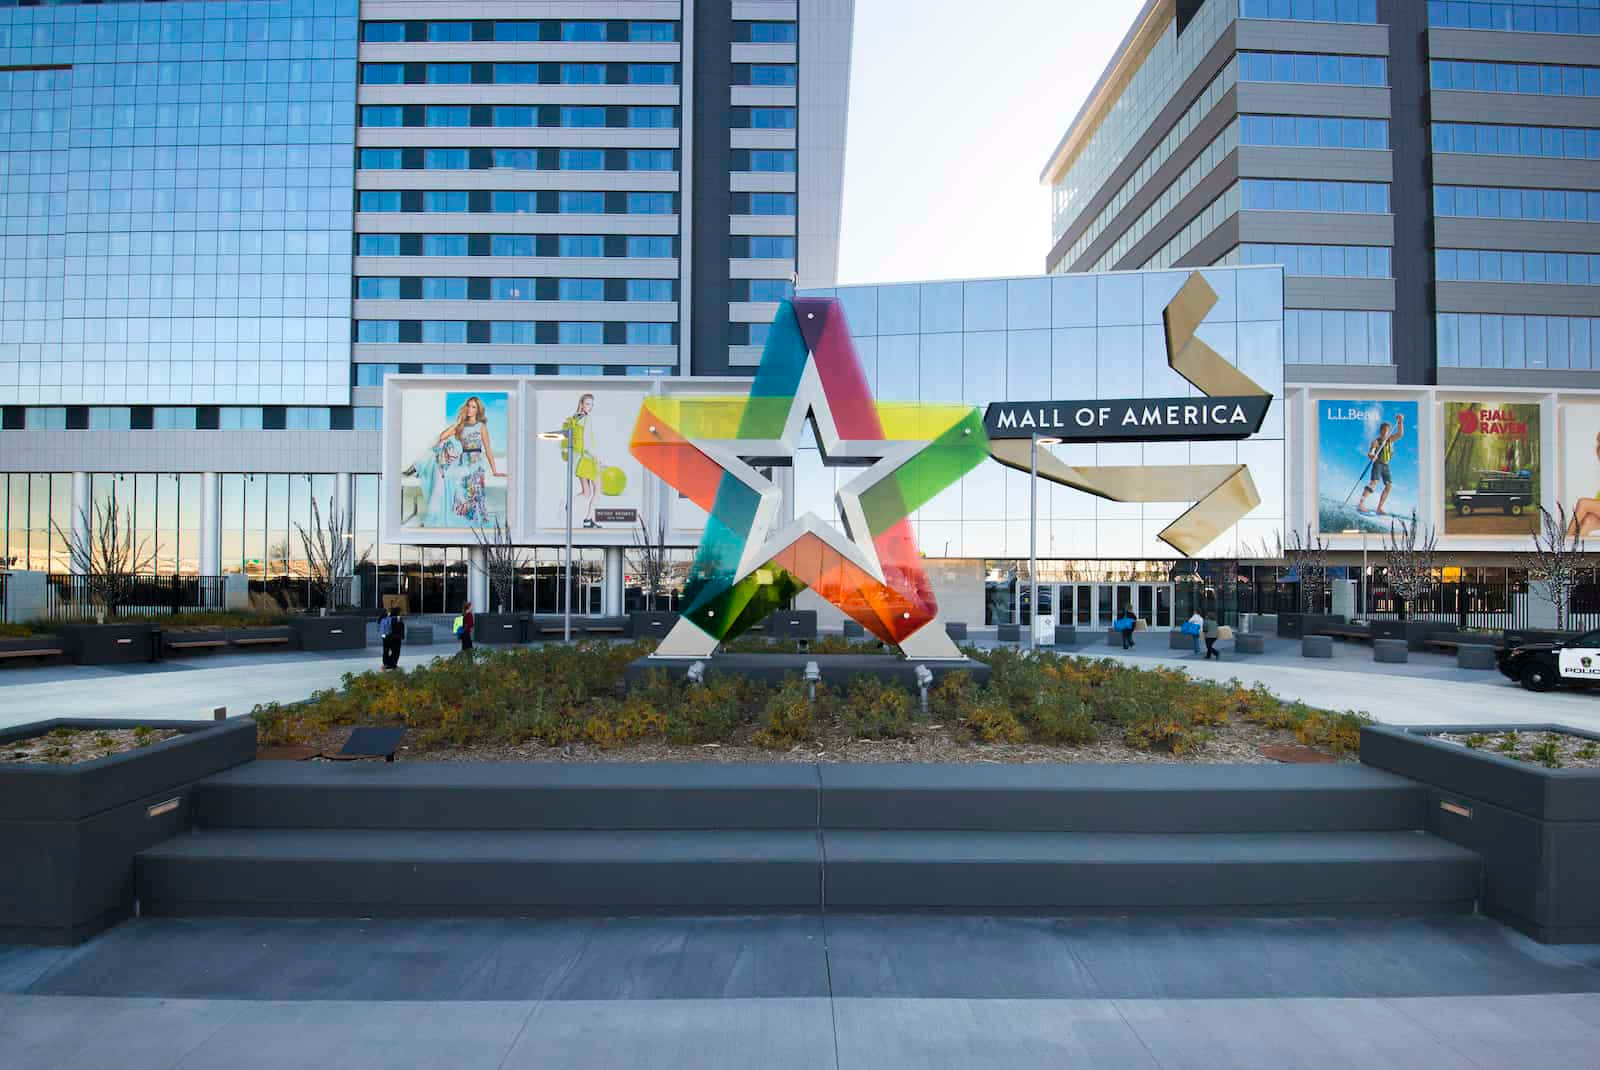 A Large Star Shaped Sculpture Is In Front Of A Building